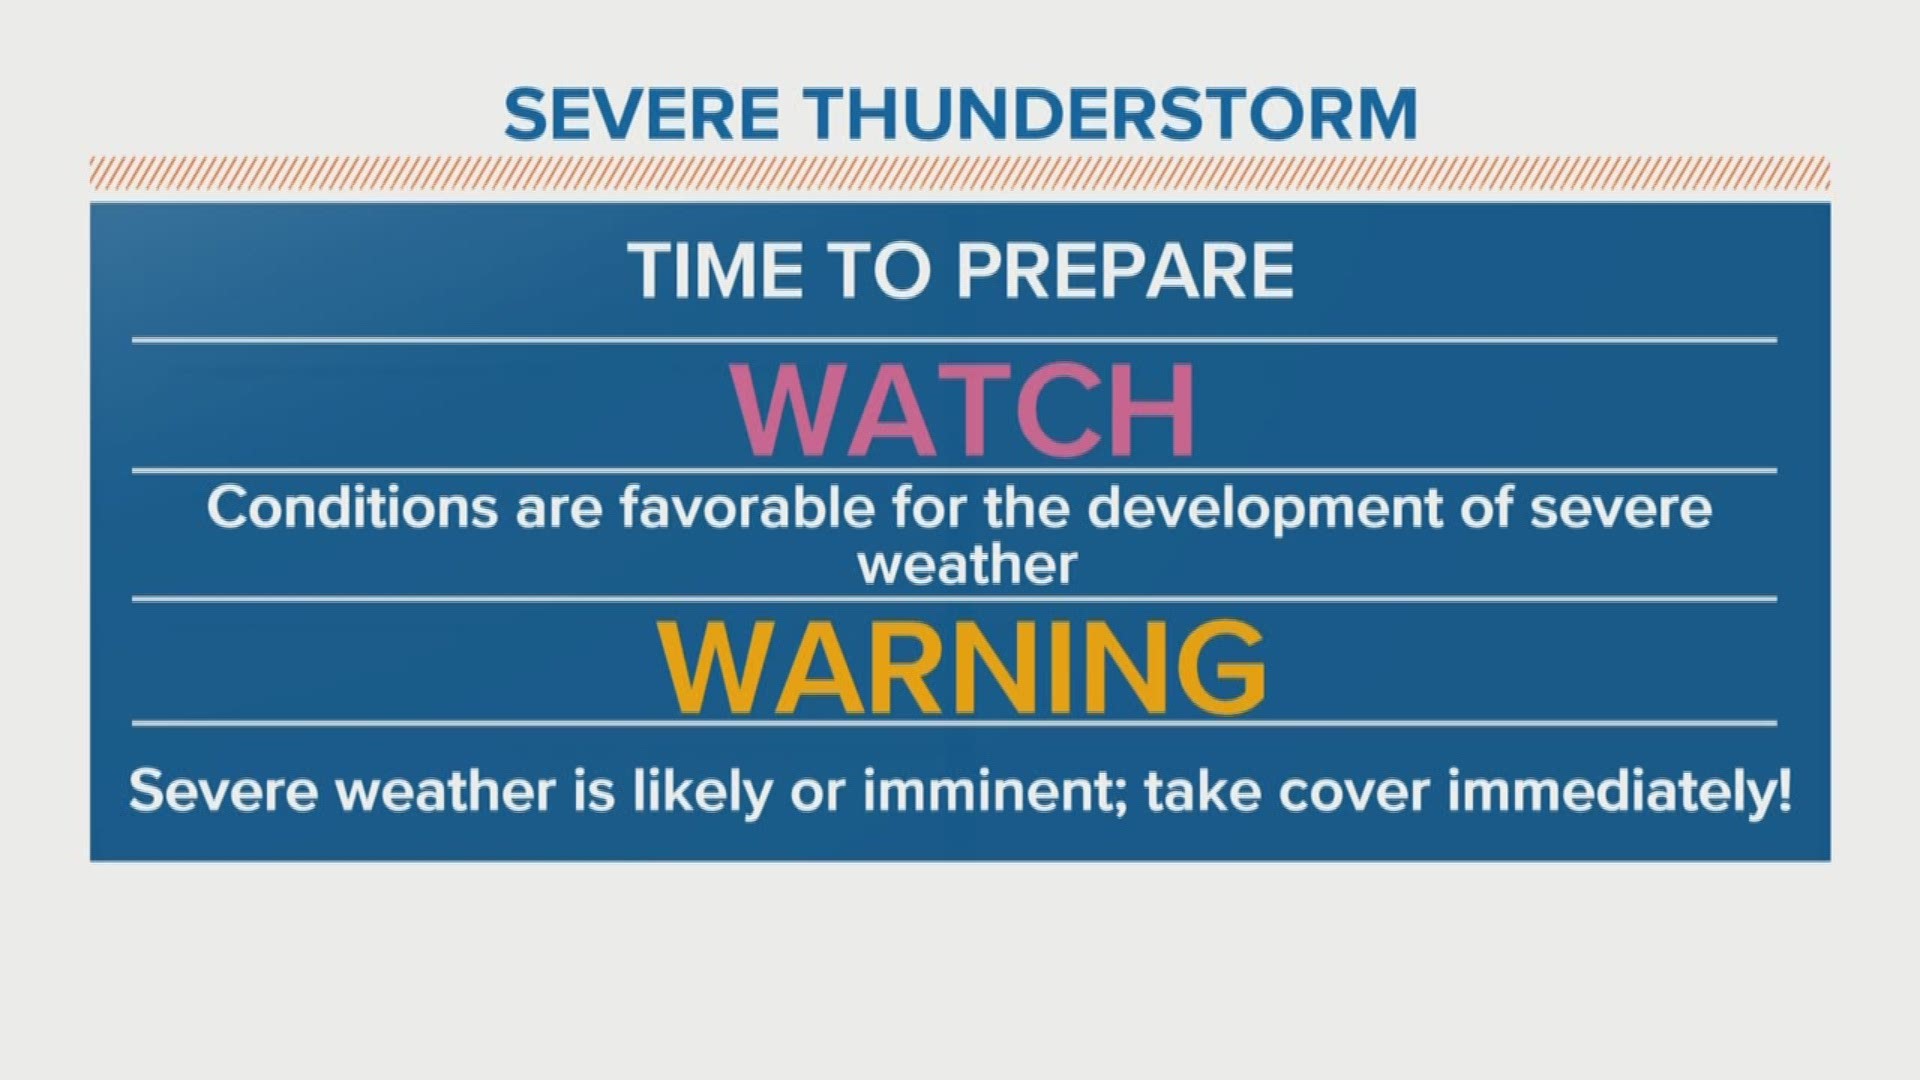 Mike Witcher goes over some severe weather tips ahead of storms.